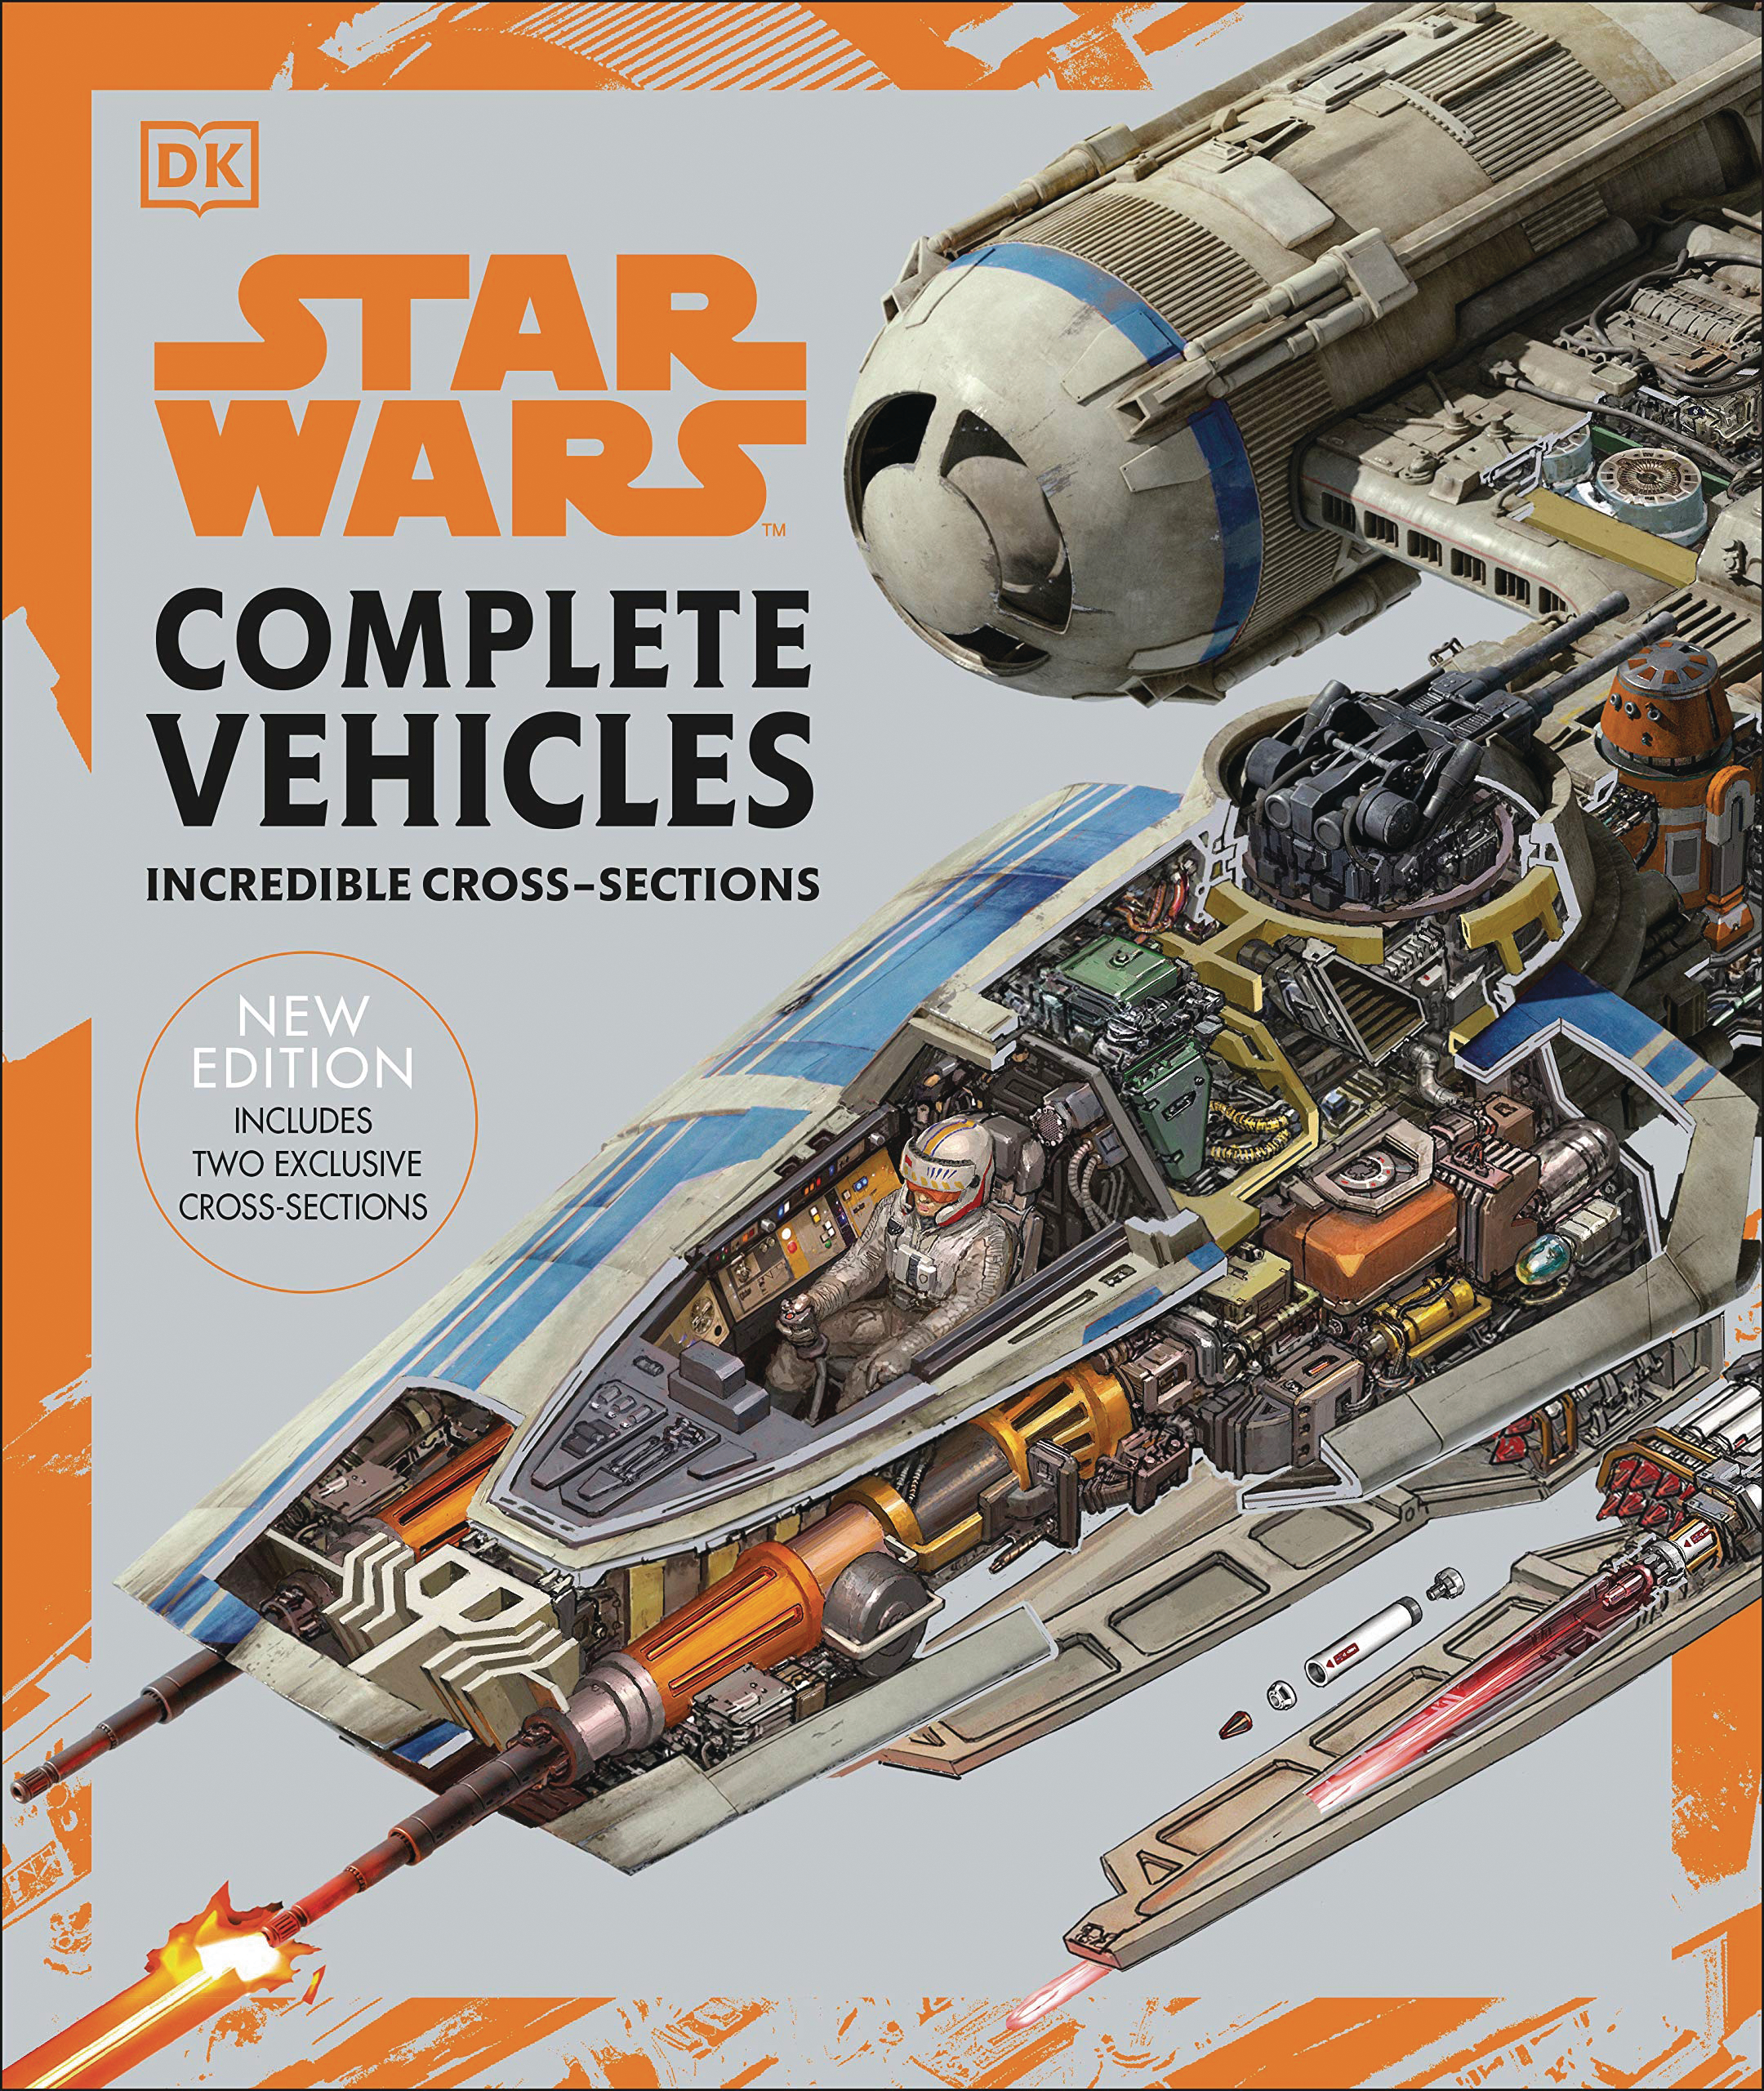 Star Wars Complete Vehicles Hardcover New Edition